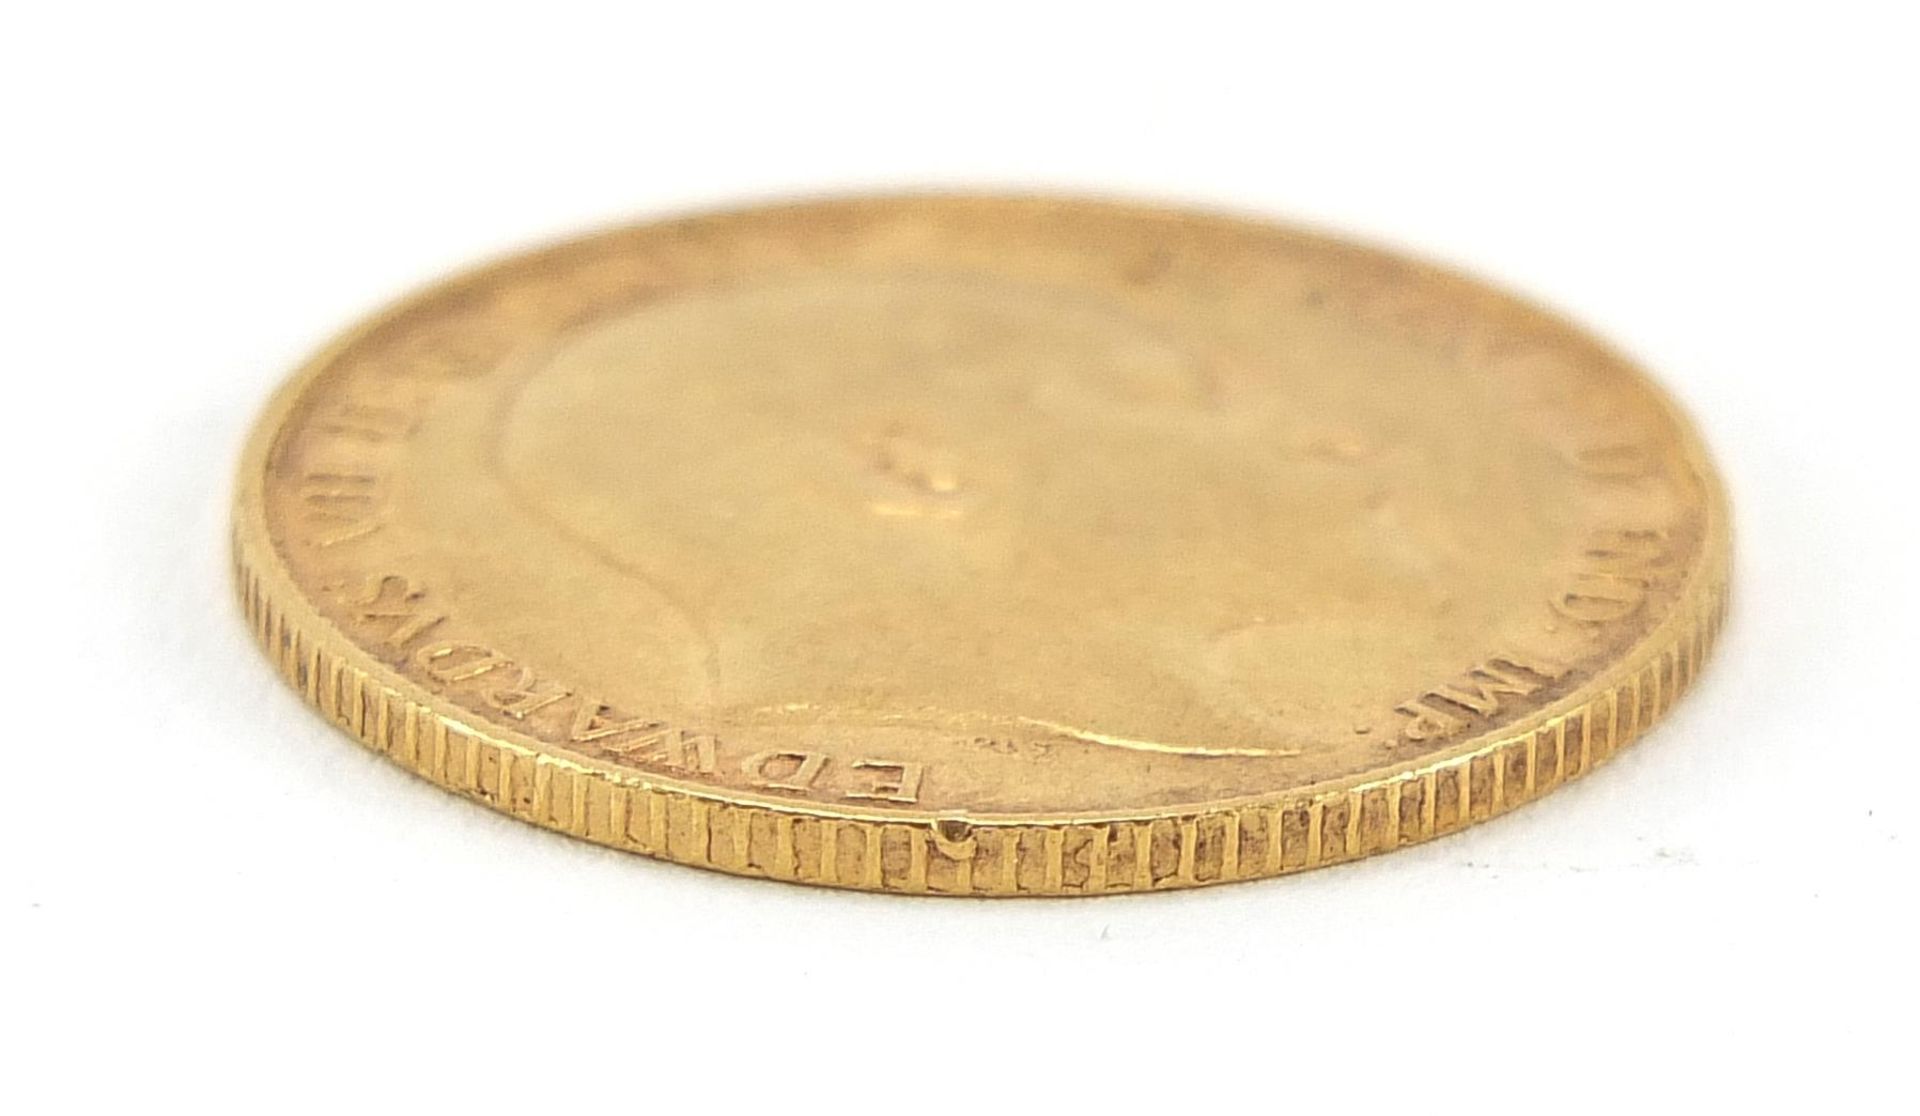 Edward VII 1902 gold half sovereign - this lot is sold without buyer's premium - Image 3 of 3